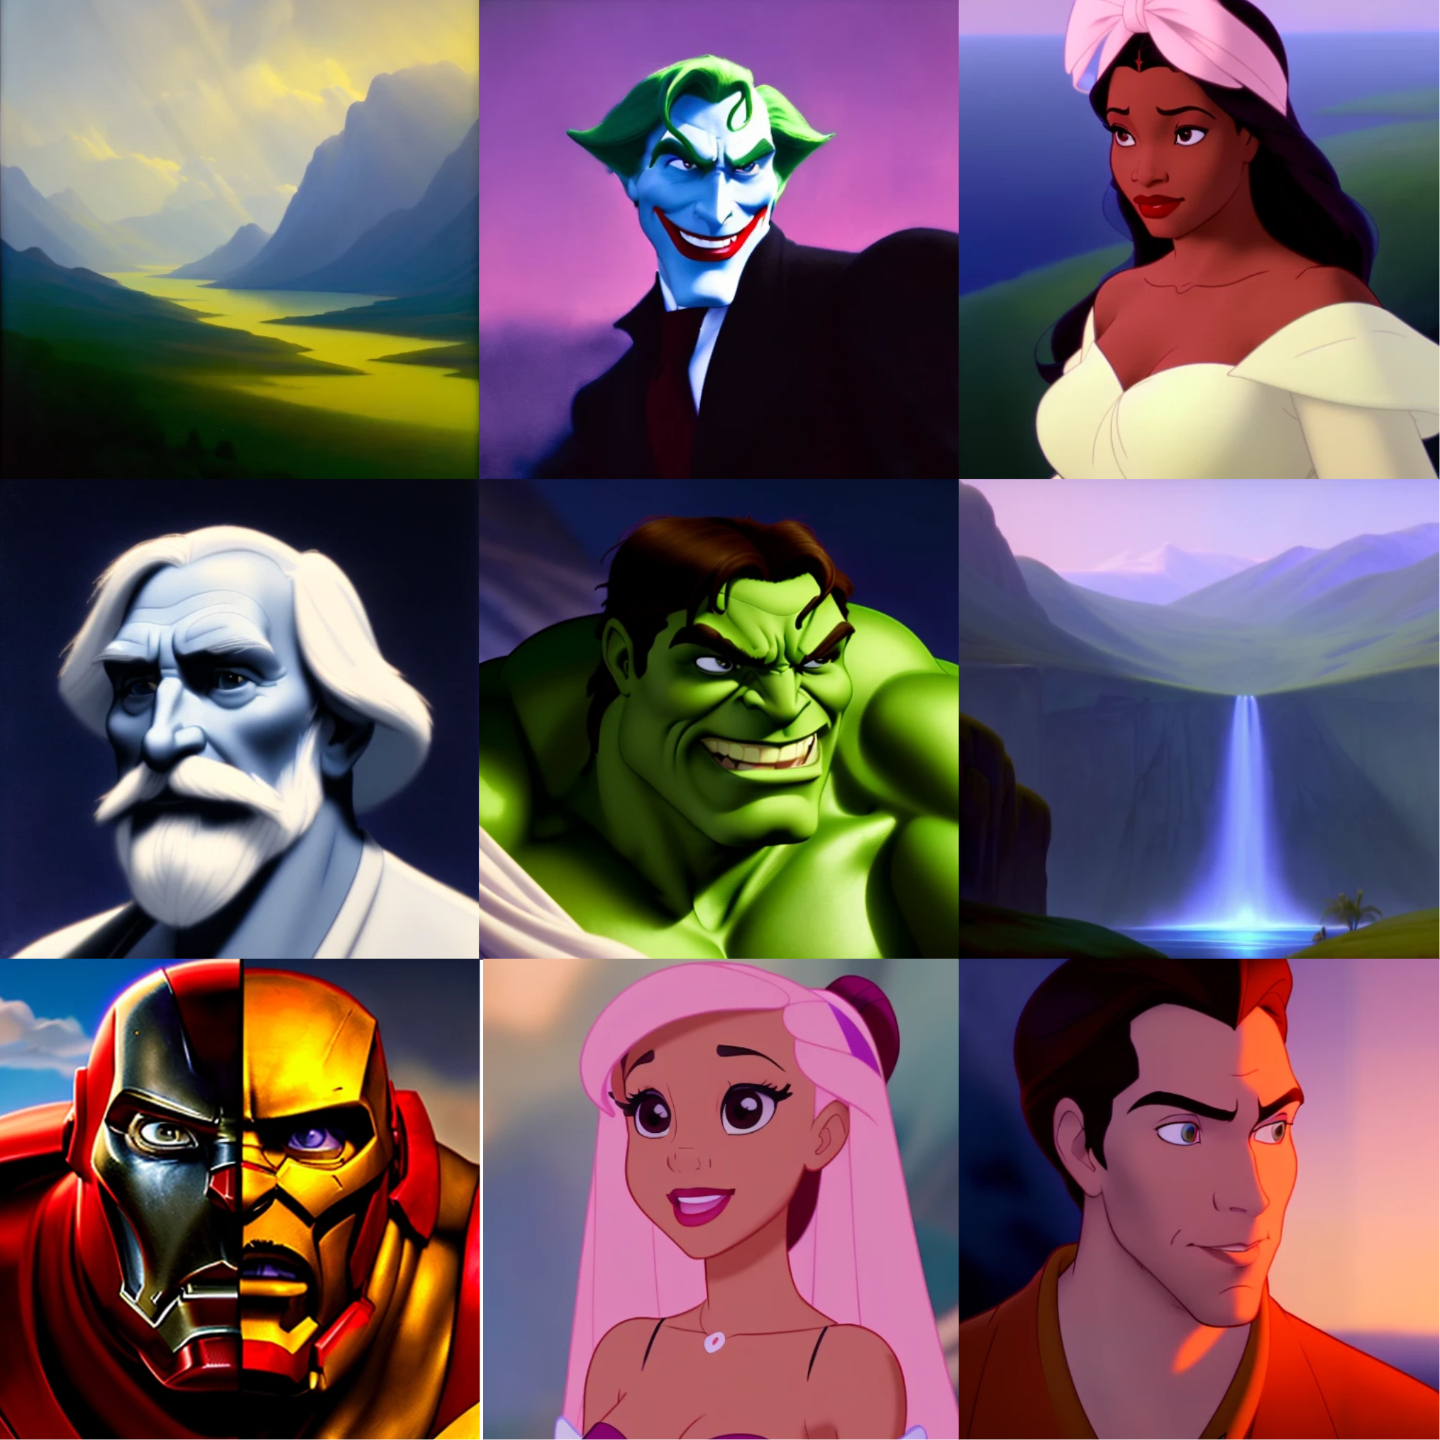 Example of images created using Classic Animation Diffusion model.